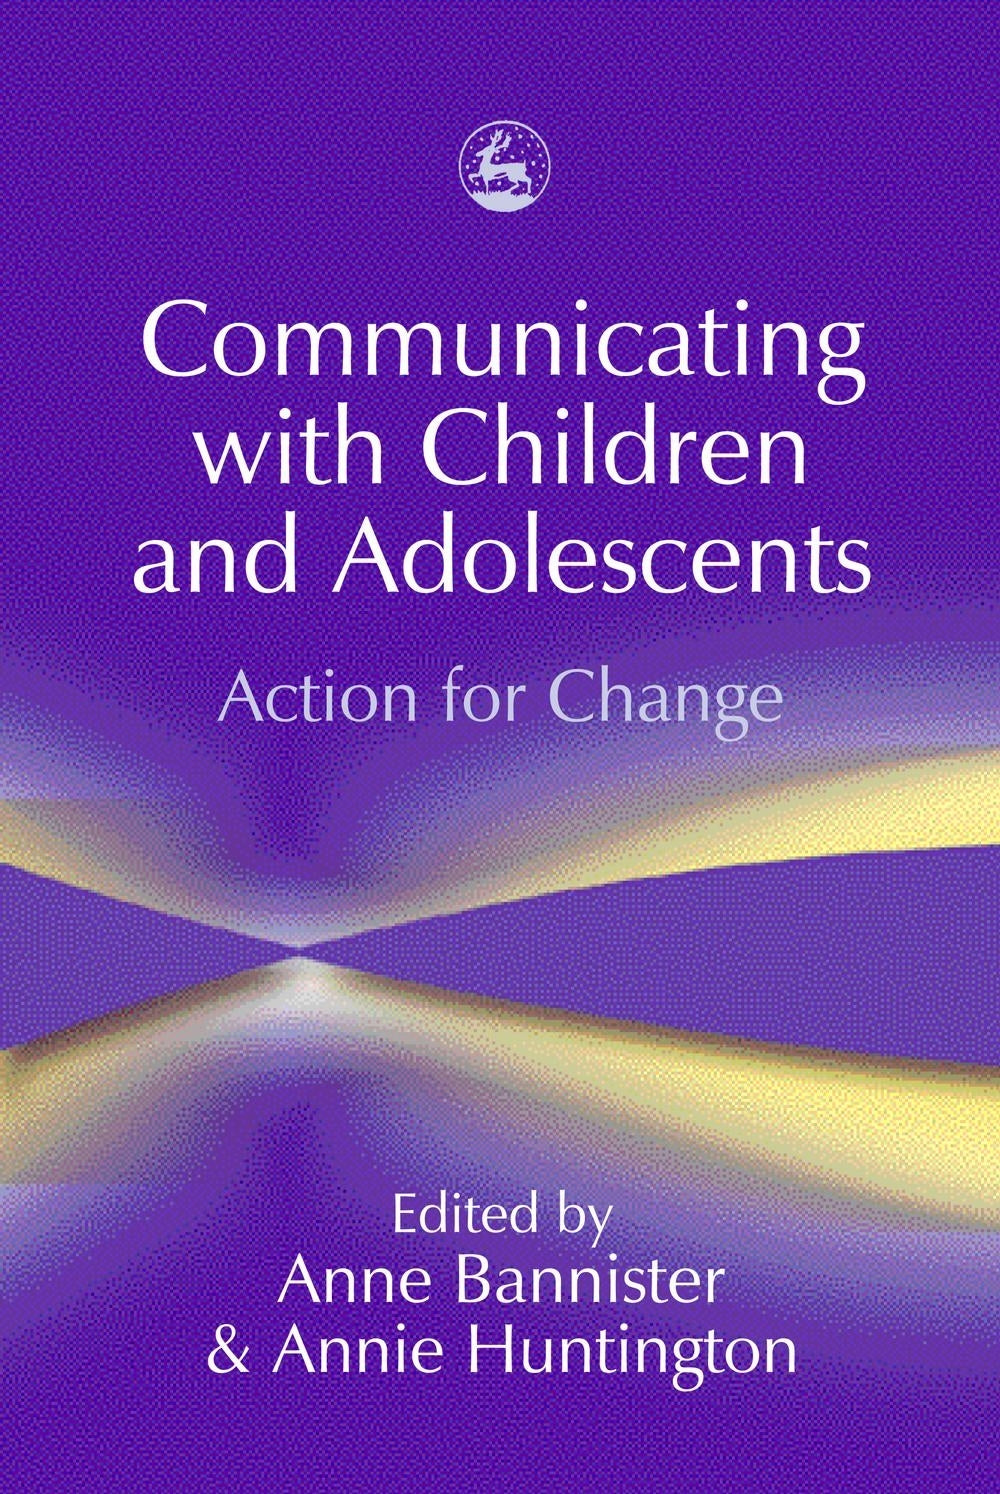 Communicating with Children and Adolescents by No Author Listed, Anne Bannister, Annie Huntington